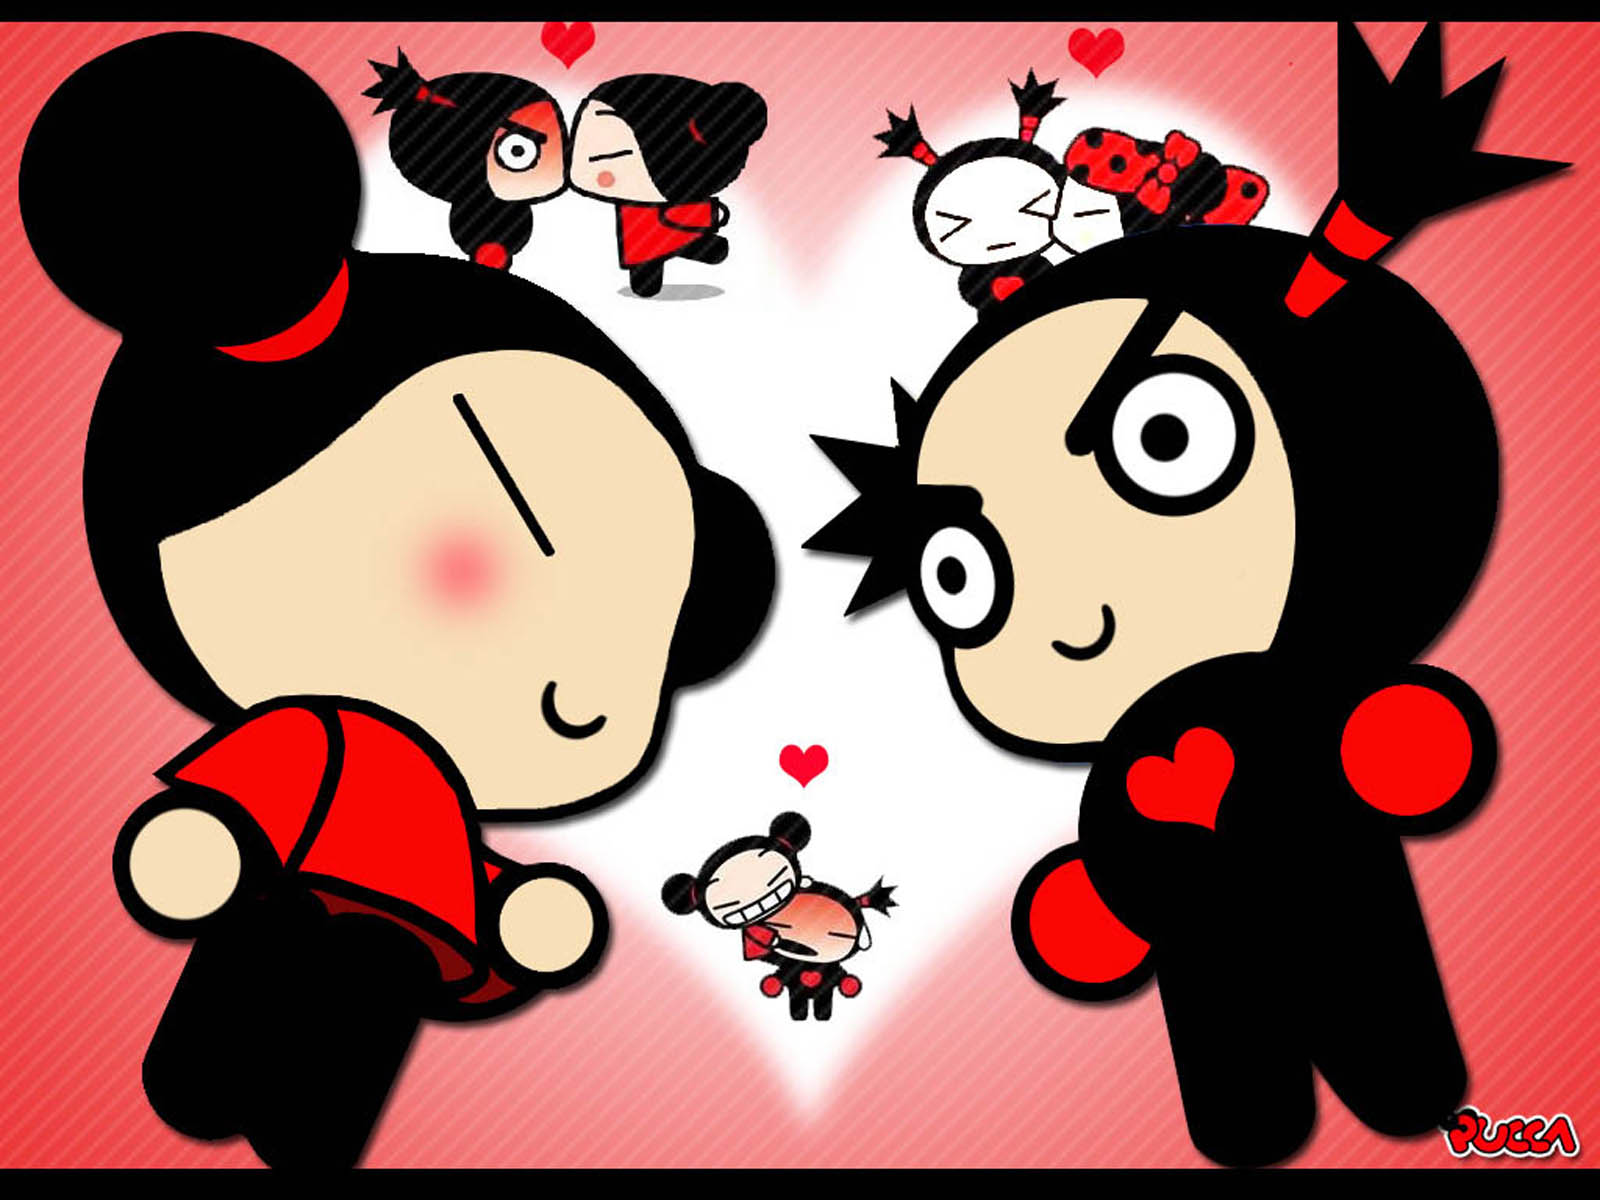 And pucca 1080P 2K 4K 5K HD wallpapers free download  Wallpaper Flare